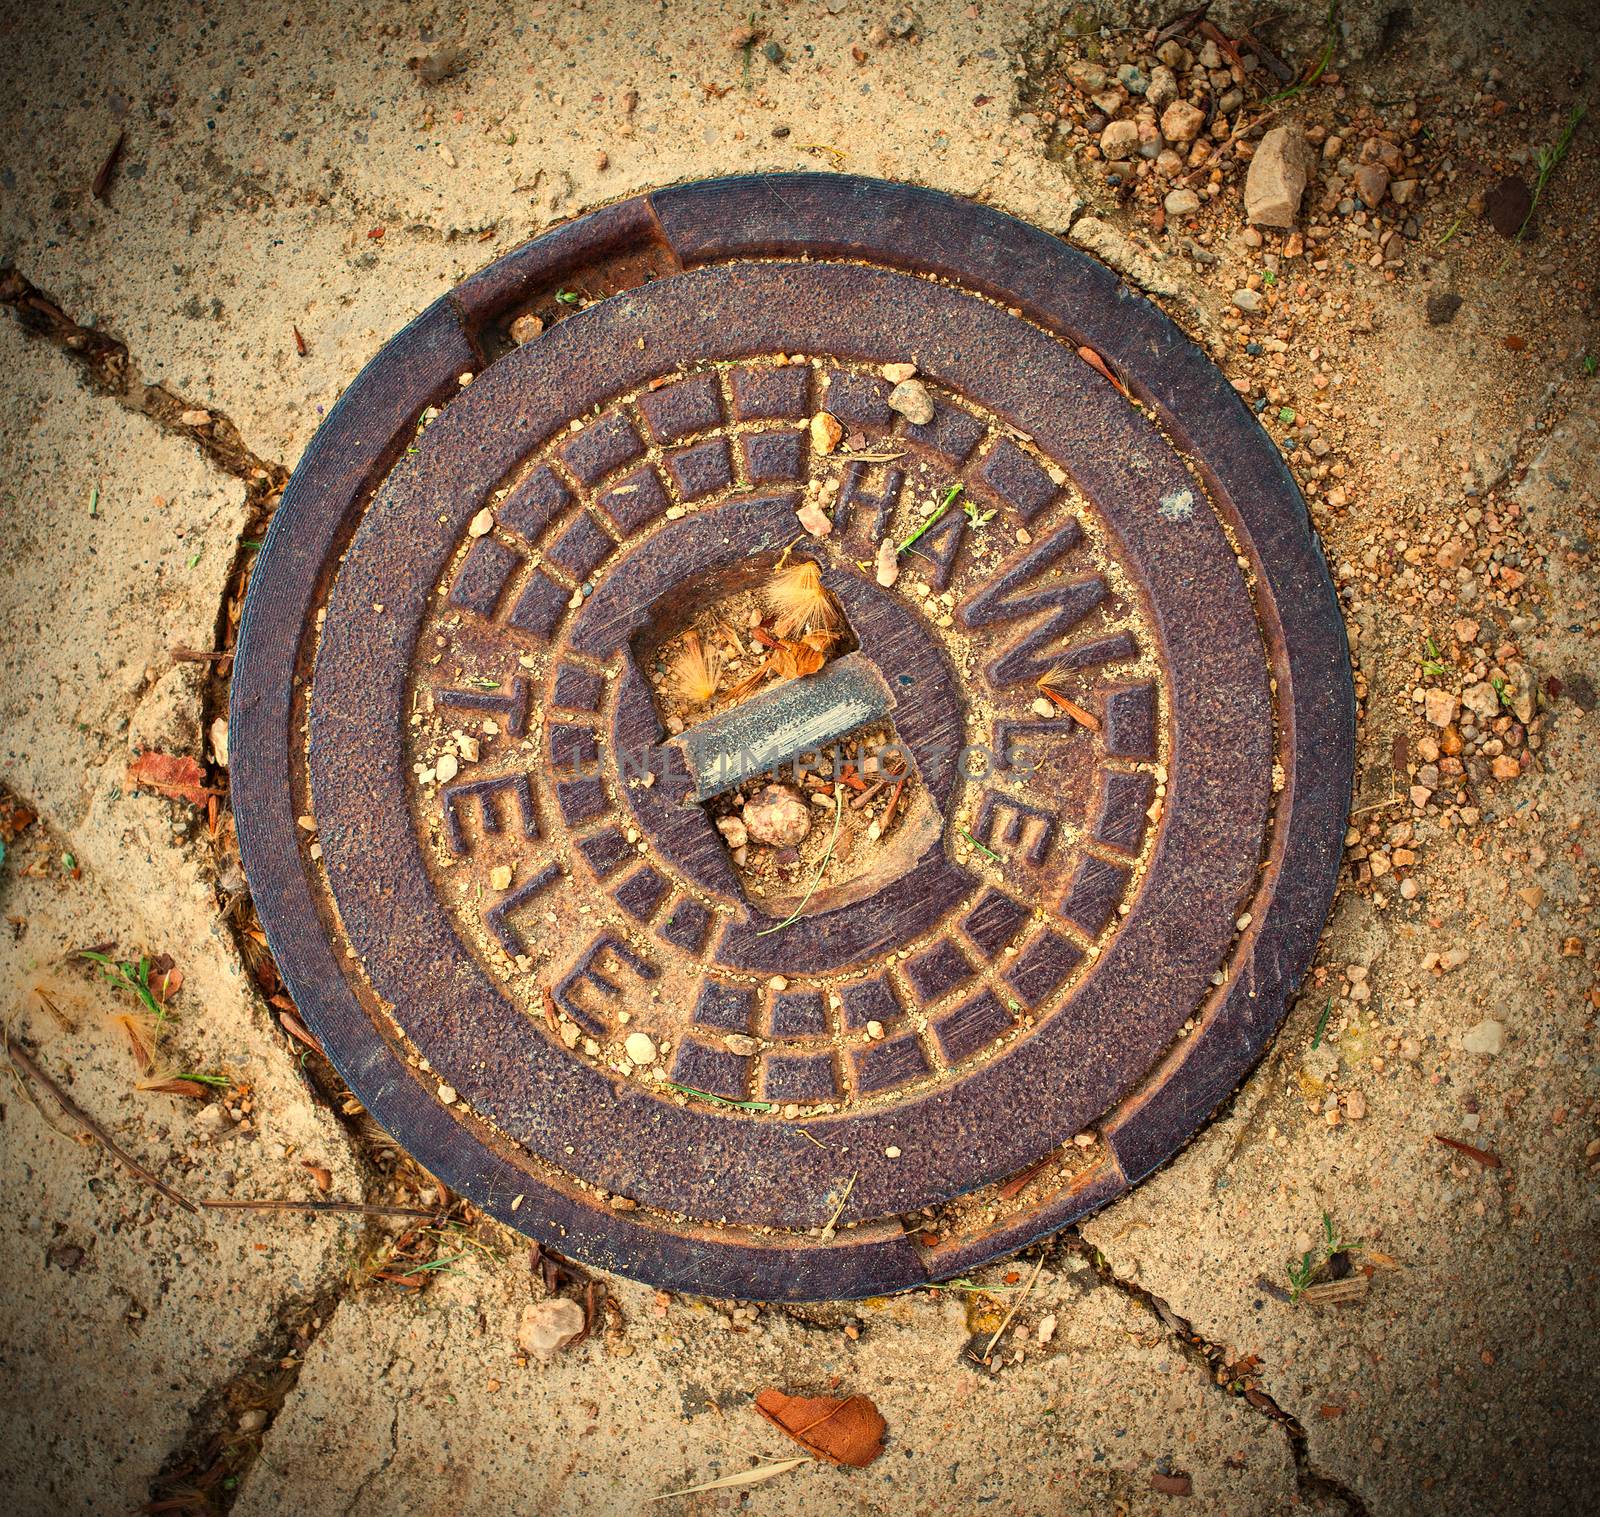 manhole cover in Tossa de Mar, Catalonia, Spain by Astroid